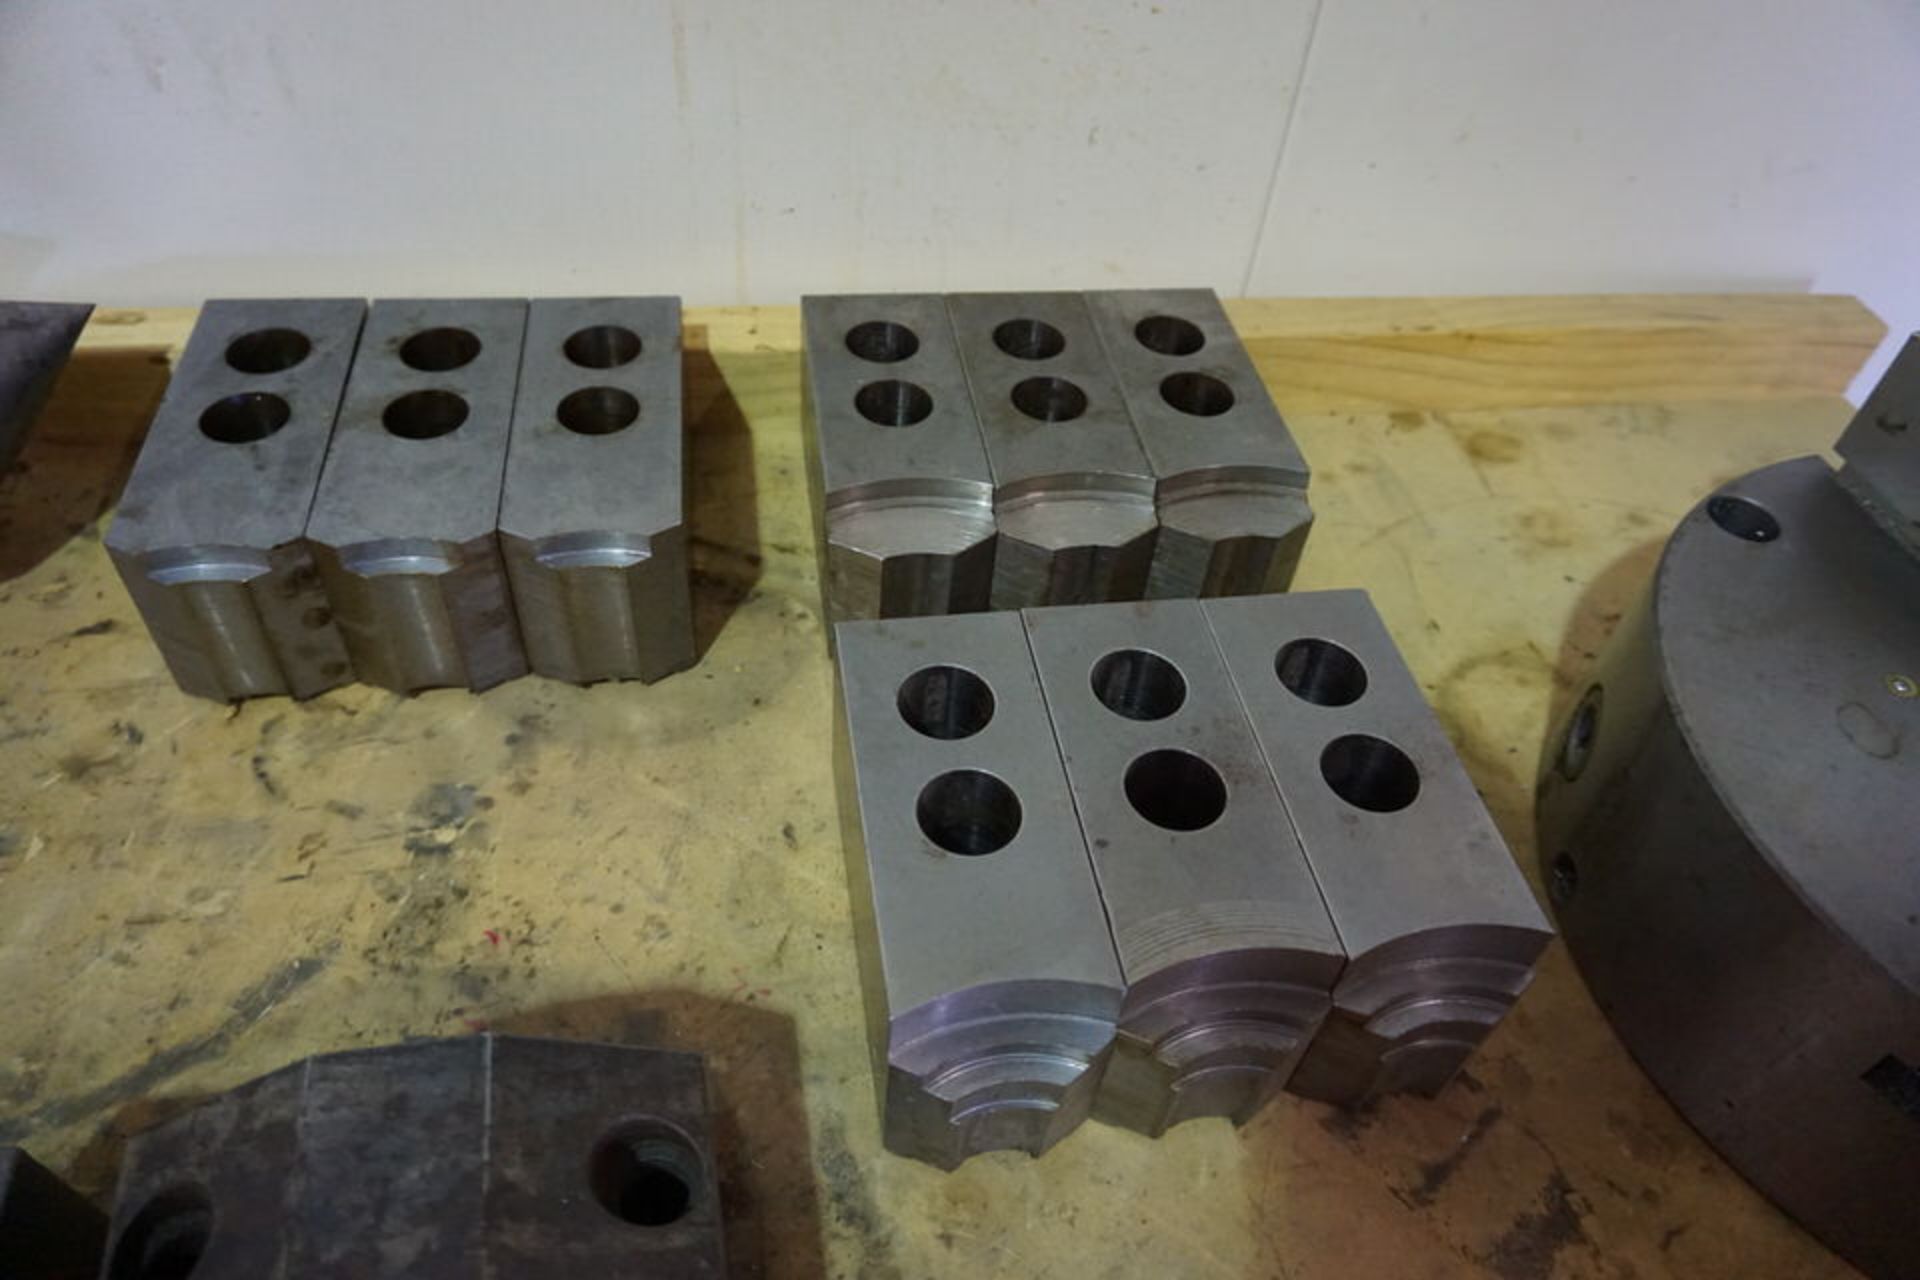 12" 3 JAW CHUCK, 3 SETS OF CHUCK JAWS, LIVE CENTER, TOOLING BLOCKS - Image 4 of 5